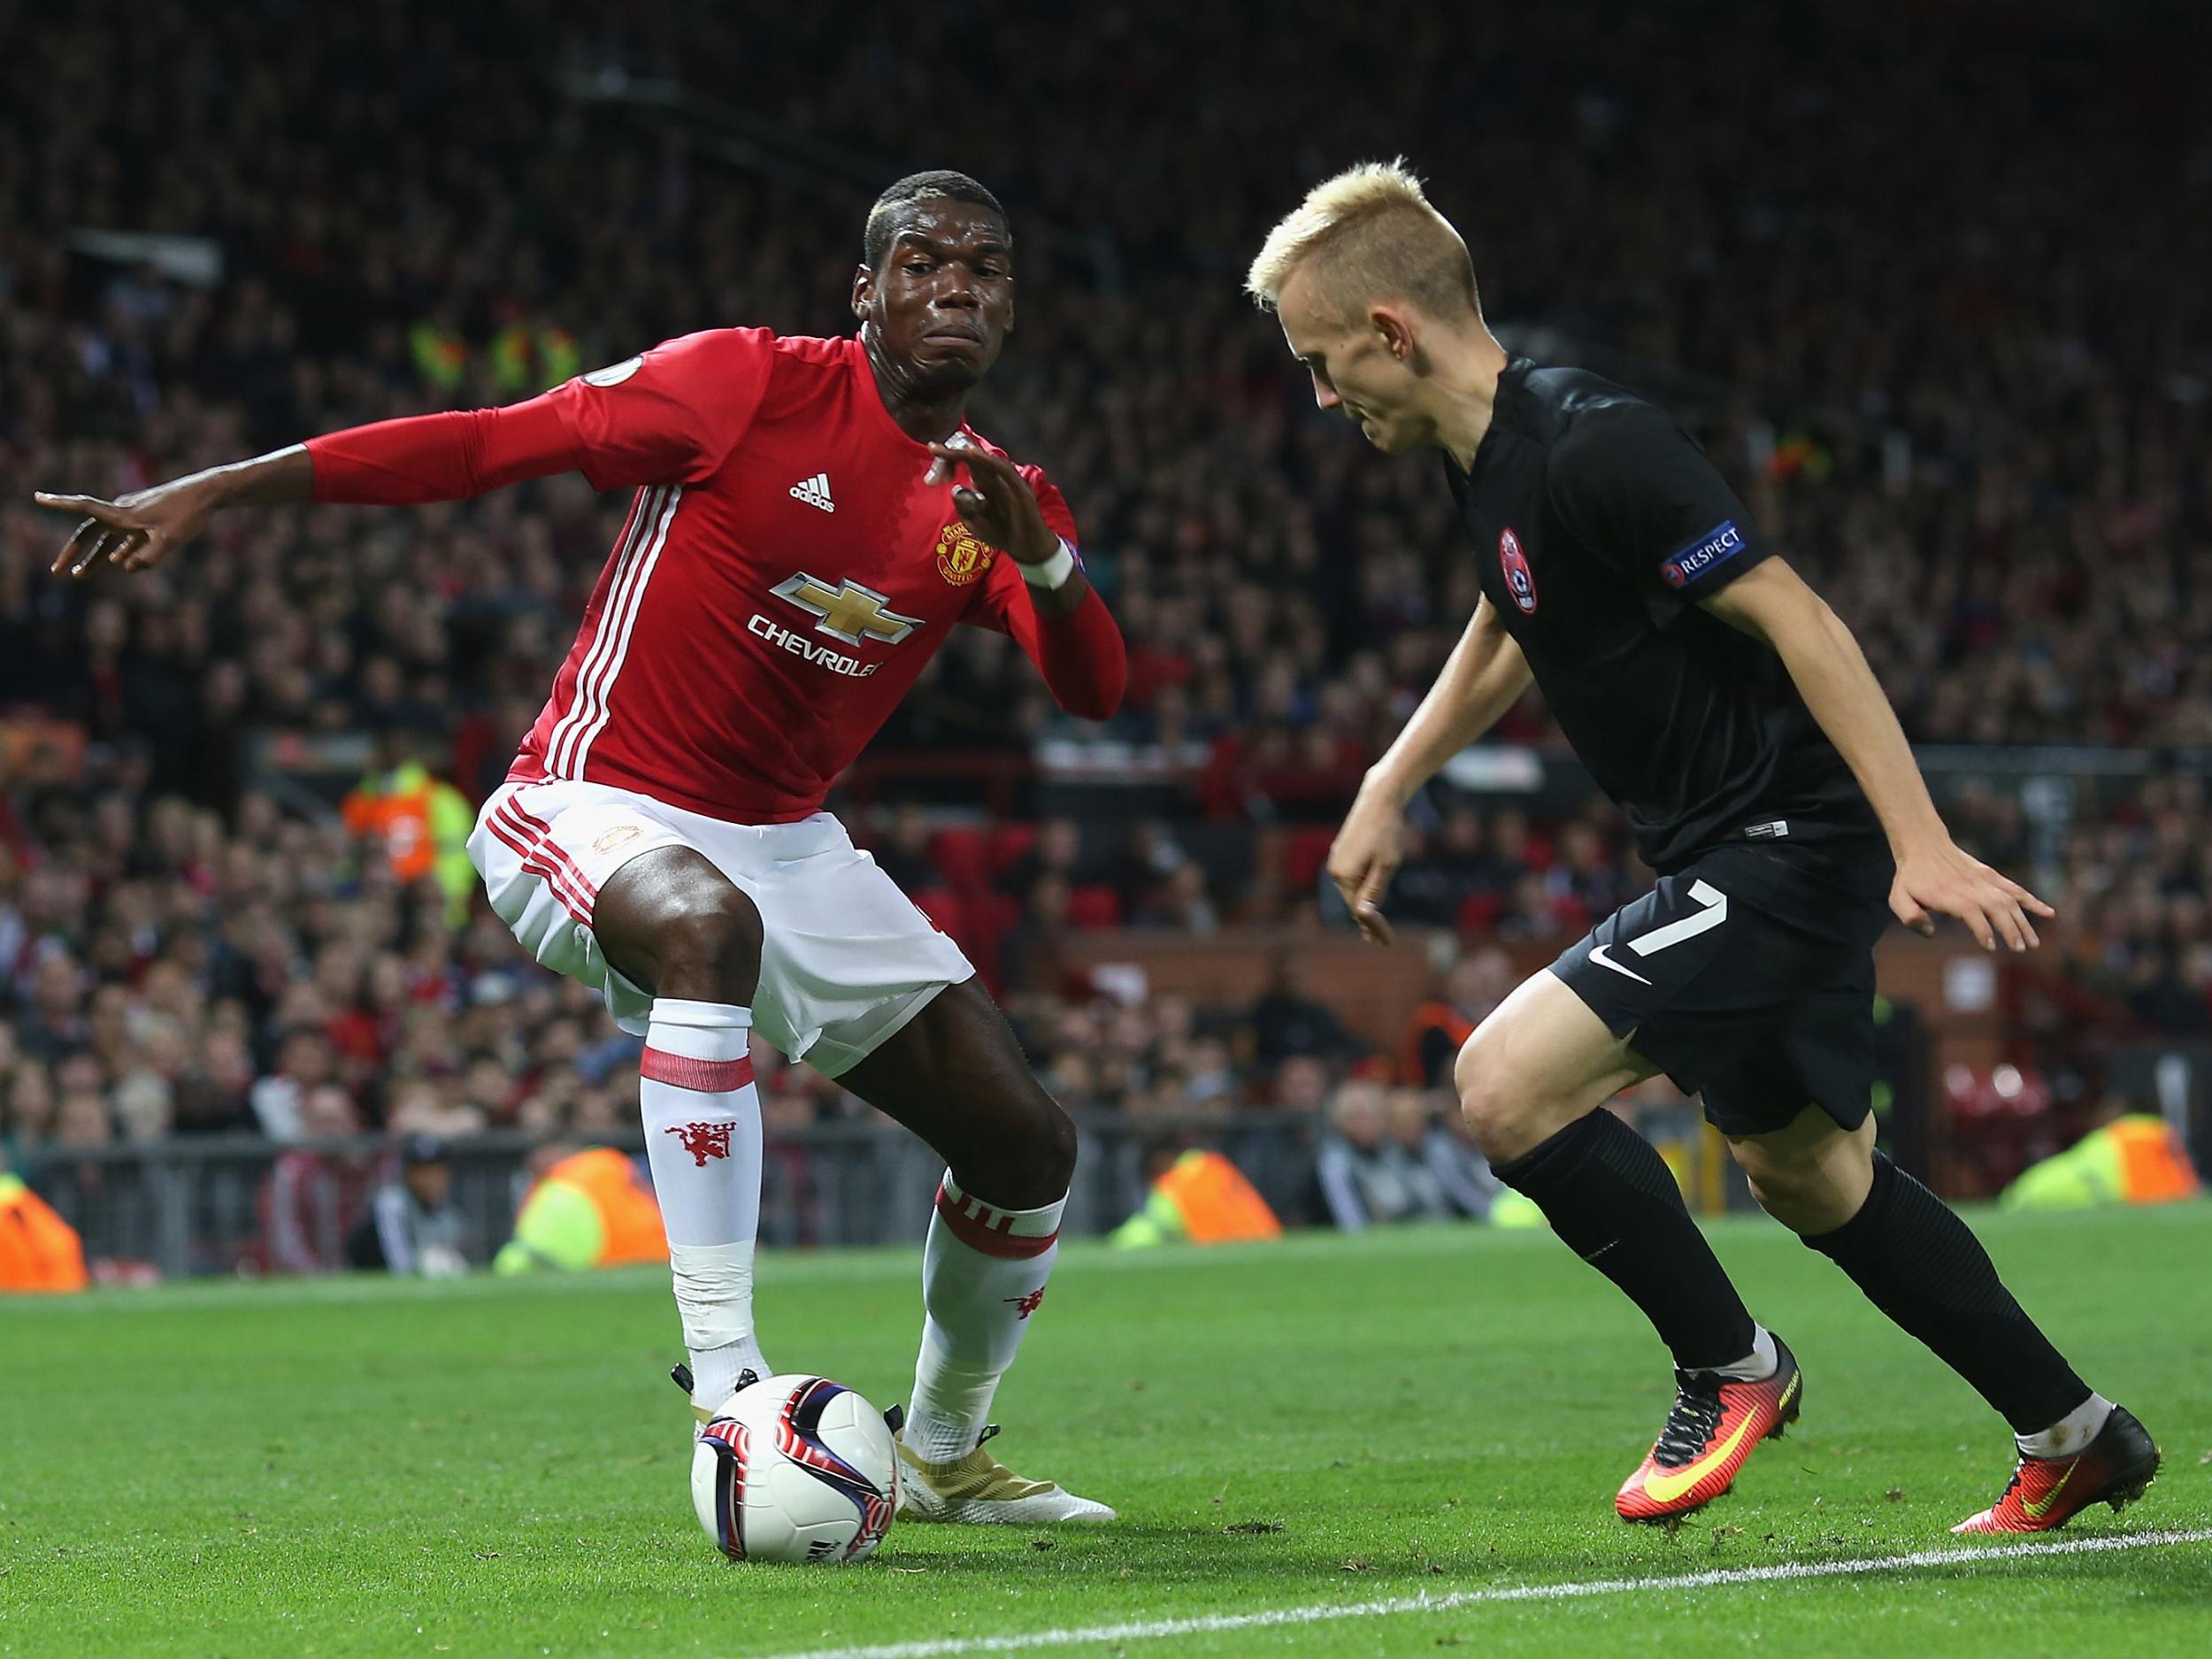 Paul Pogba makes inroads into the Zorya defence at Old Trafford